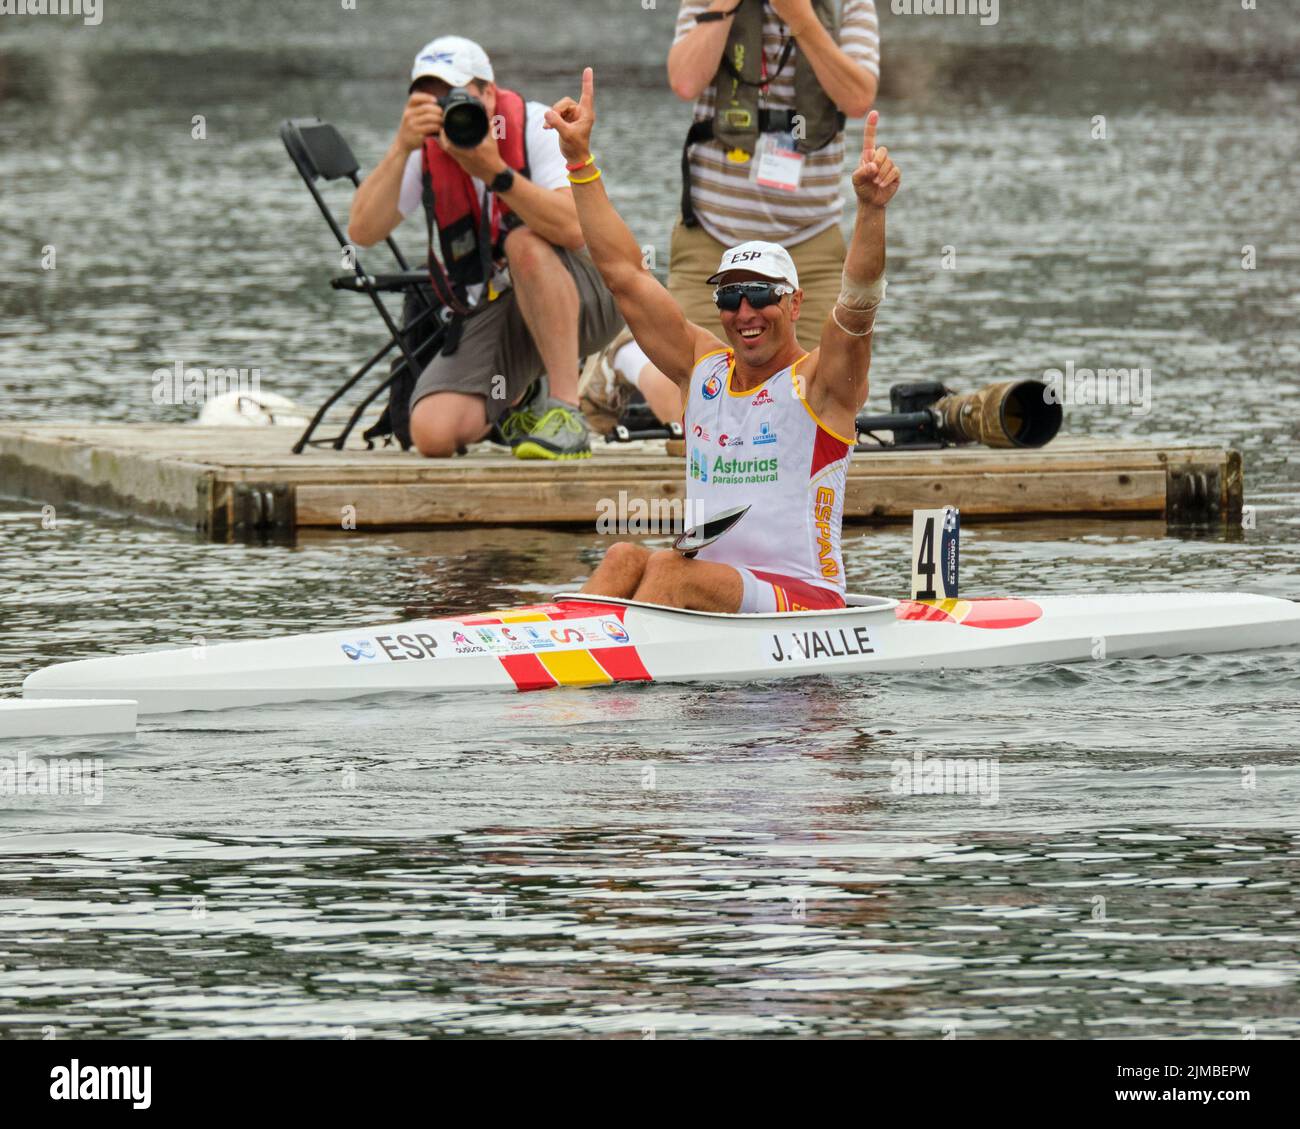 Dartmouth, Canada. August 5th, 2022 Juan Valle from Spain celebrates winnig Gold in the Men Paracanoe KL3 200m World Championships in a photofinish with 0.08 seconds between Gold and Bronze. Robert Oliver from Great Britain takes Silver and Dylan Littlehales from Australia took bronze. The 2022 ICF Canoe Sprint and Paracanoe World Championships takes place on Lake Banook in Dartmouth (Halifax). Credit: meanderingemu/Alamy Live News Stock Photo